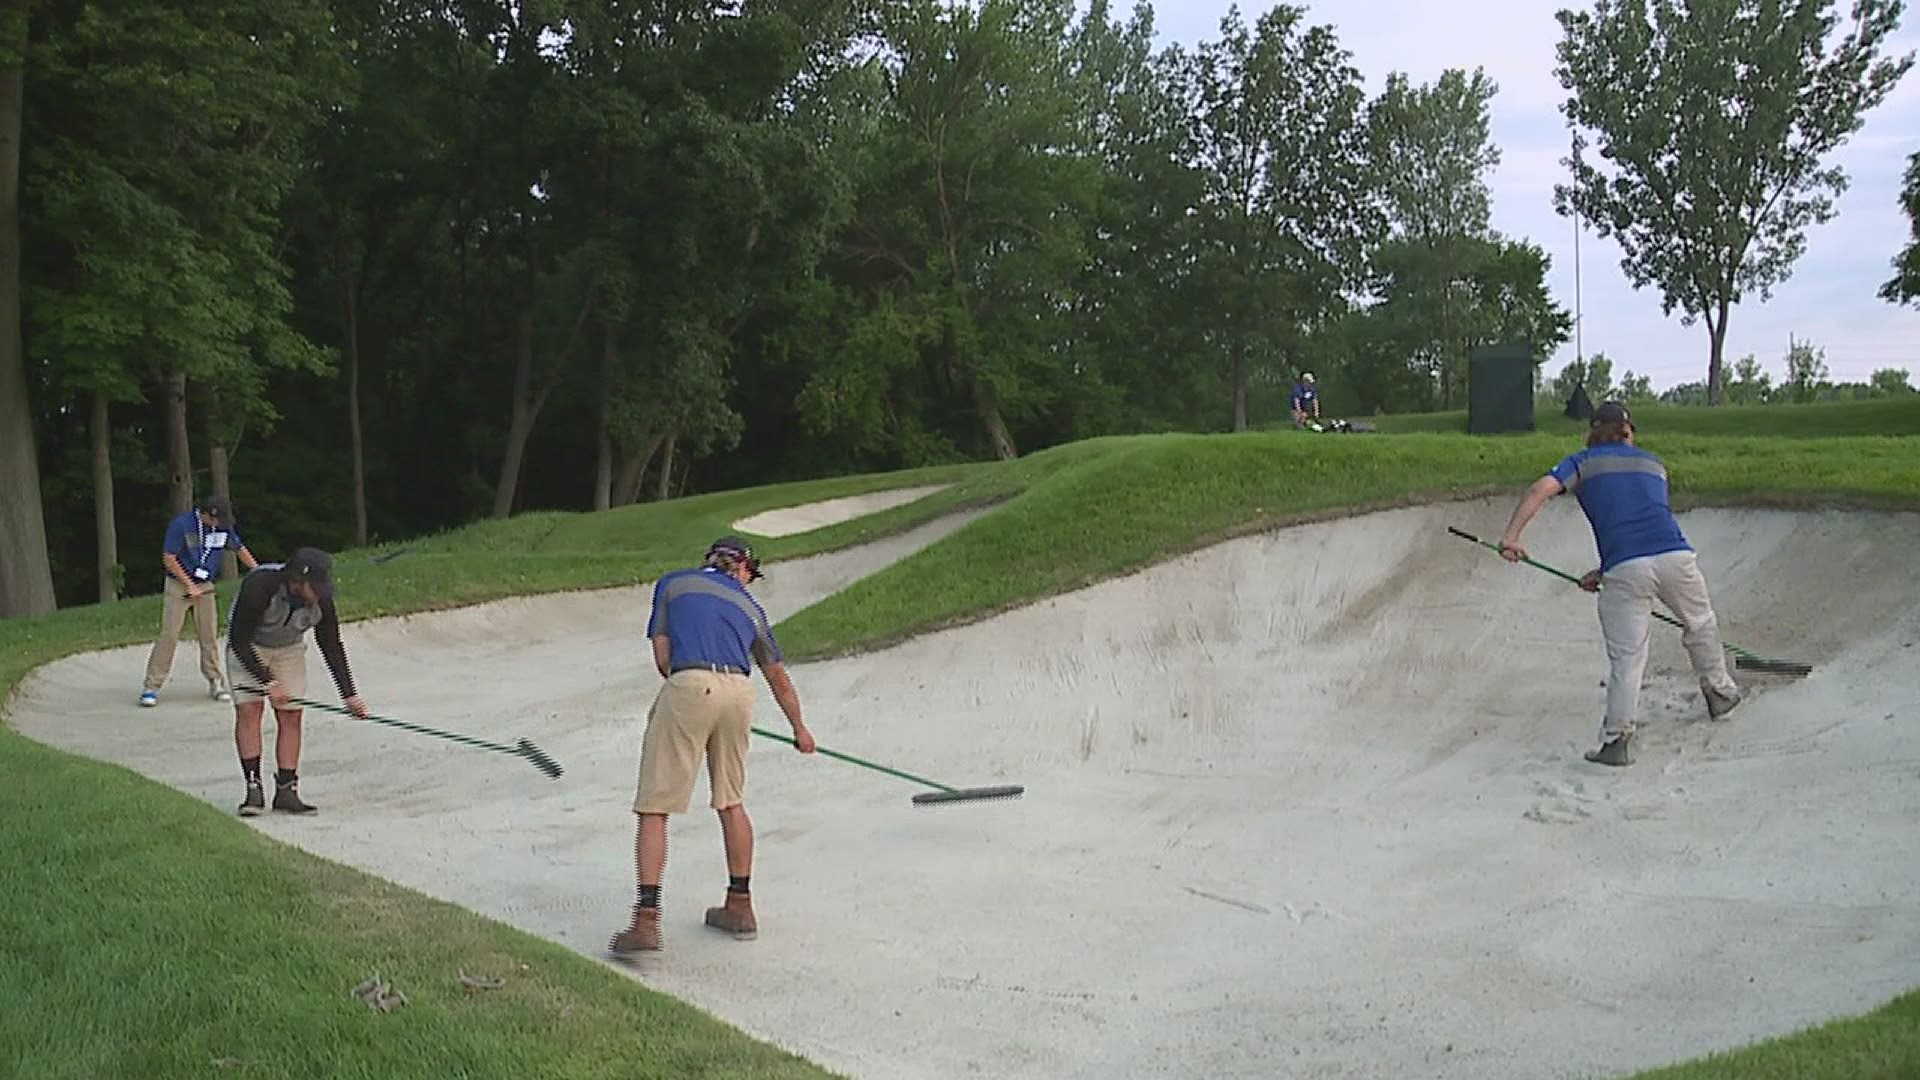 The superintendent of the course takes News 8's Jillian Mahen around for a tour of the preps.